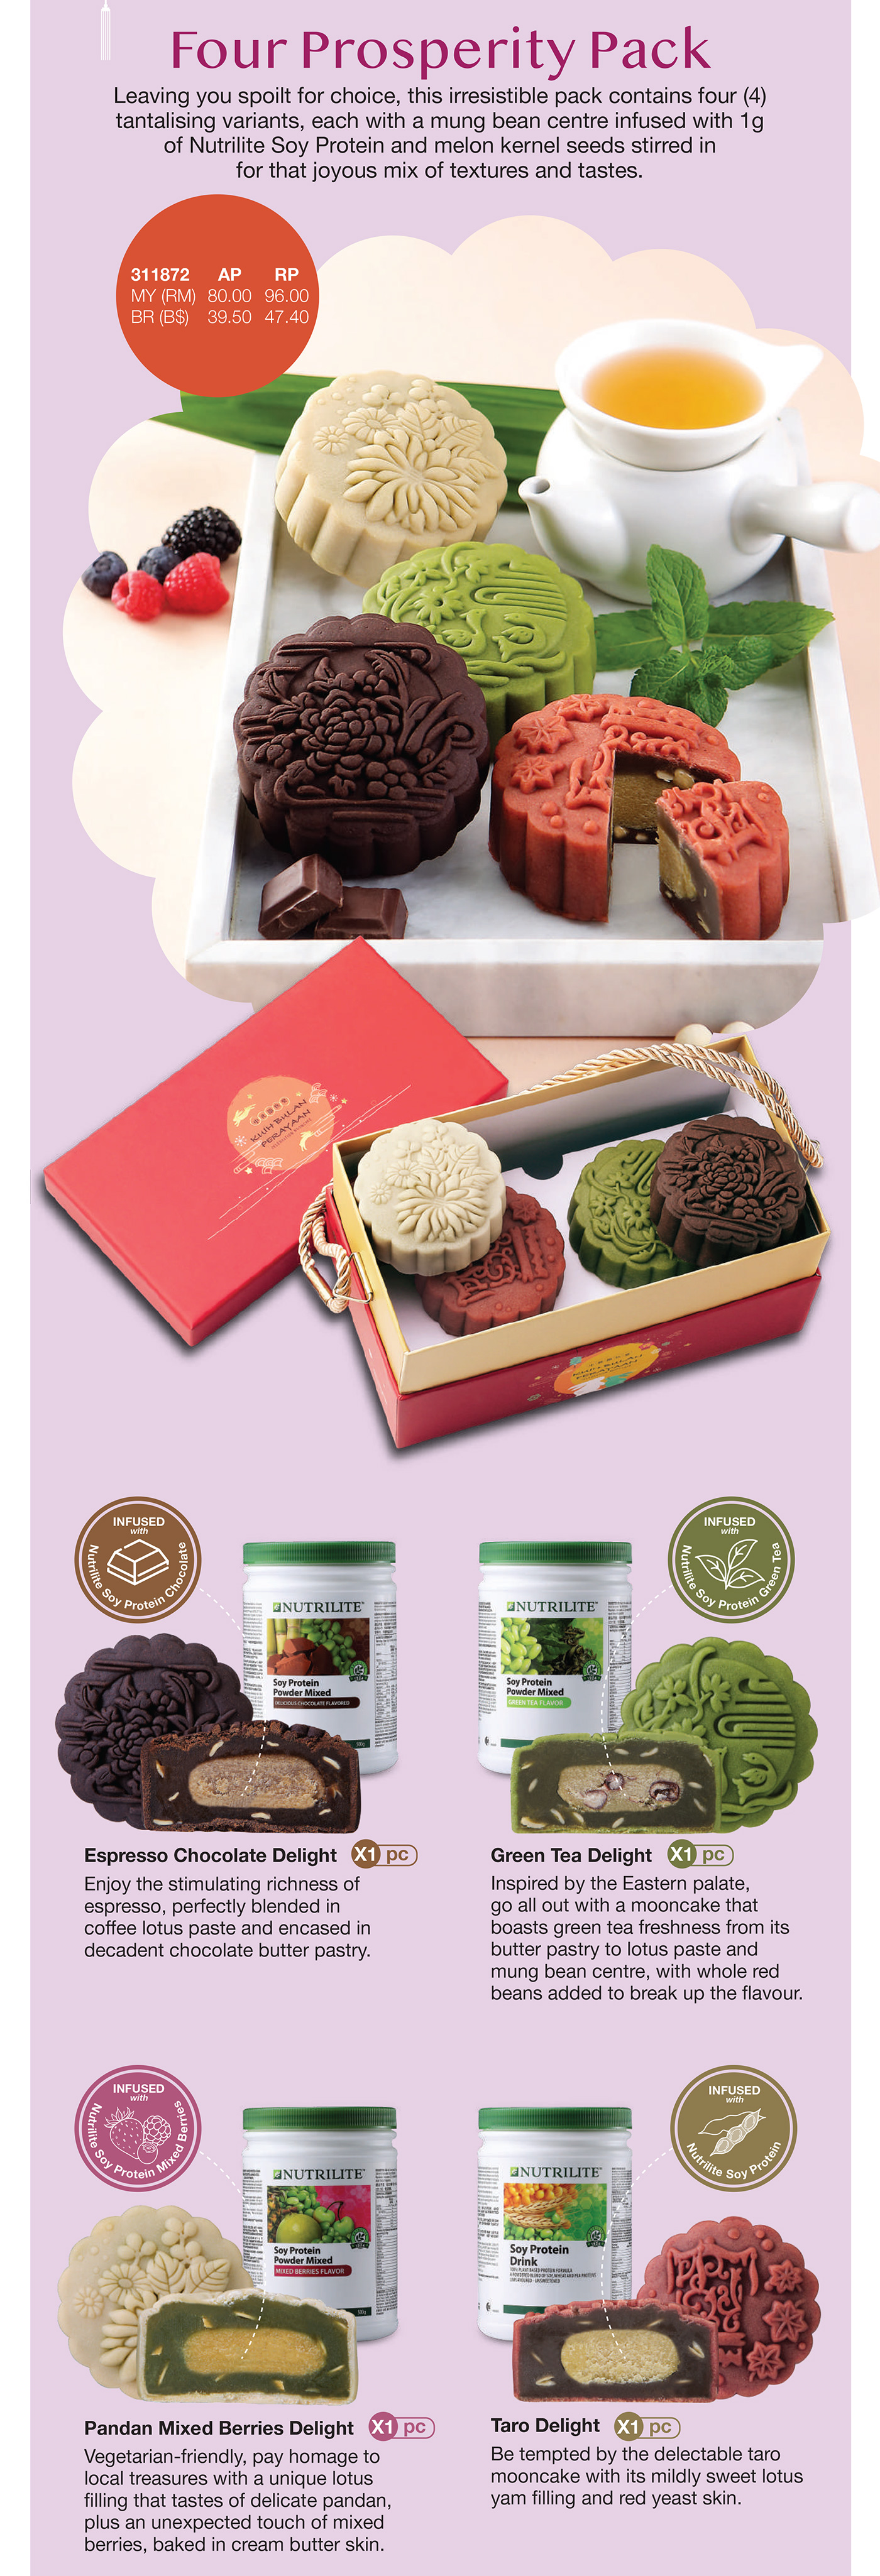 Celebrate The Autumn Festival With Nutrilite Soy Protein-infused Celebration Mooncakes